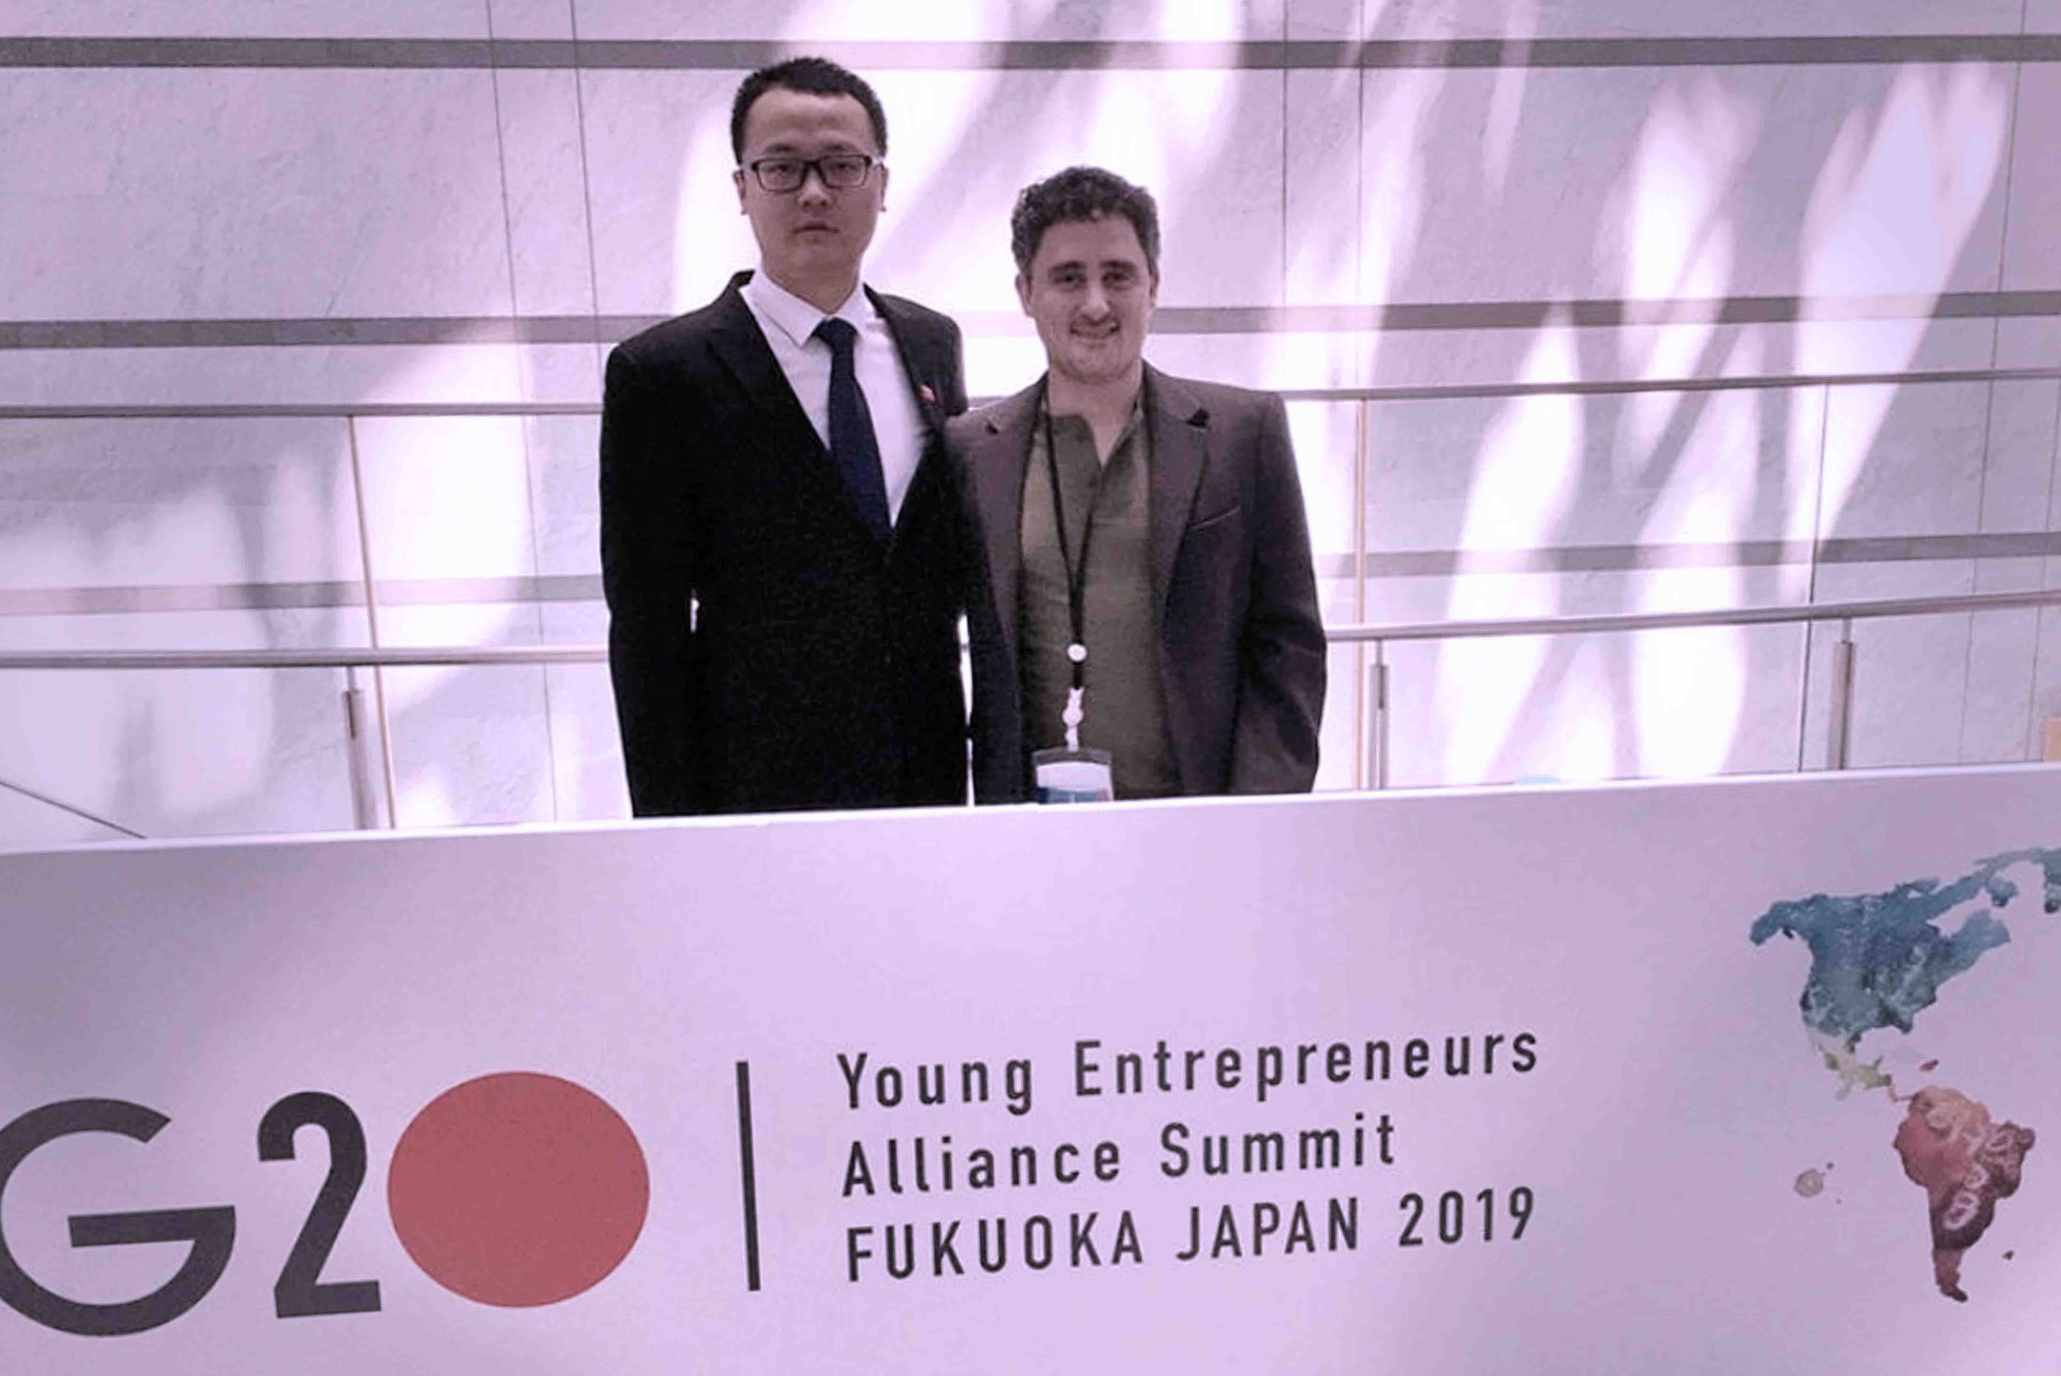 Francisco Santolo at the G20 Young Entrepreneurs' Alliance Summit in Japan